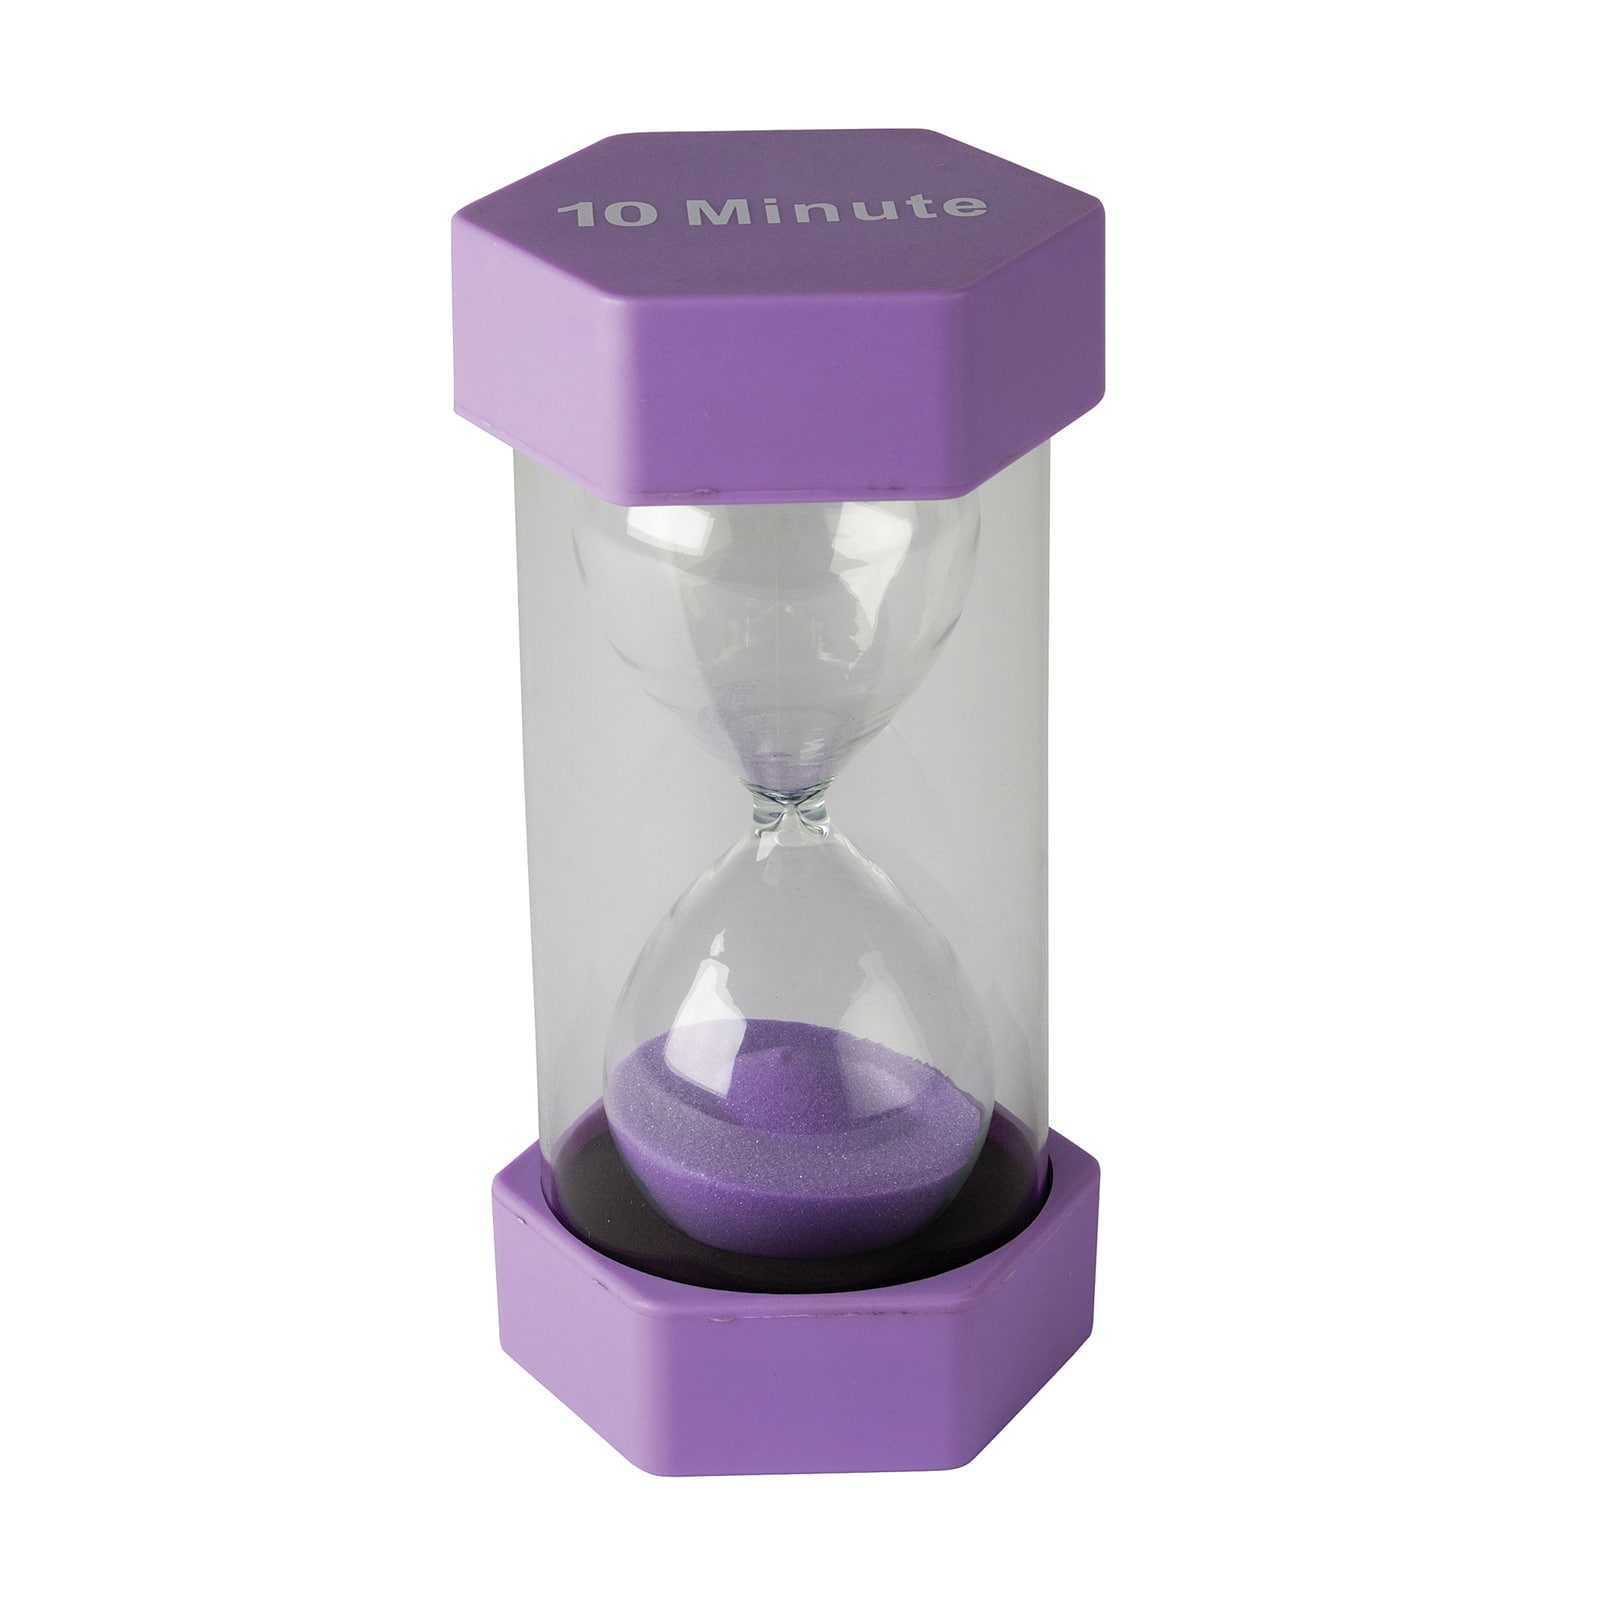 Teacher Created Resources 10 Minute Large Sand Timer